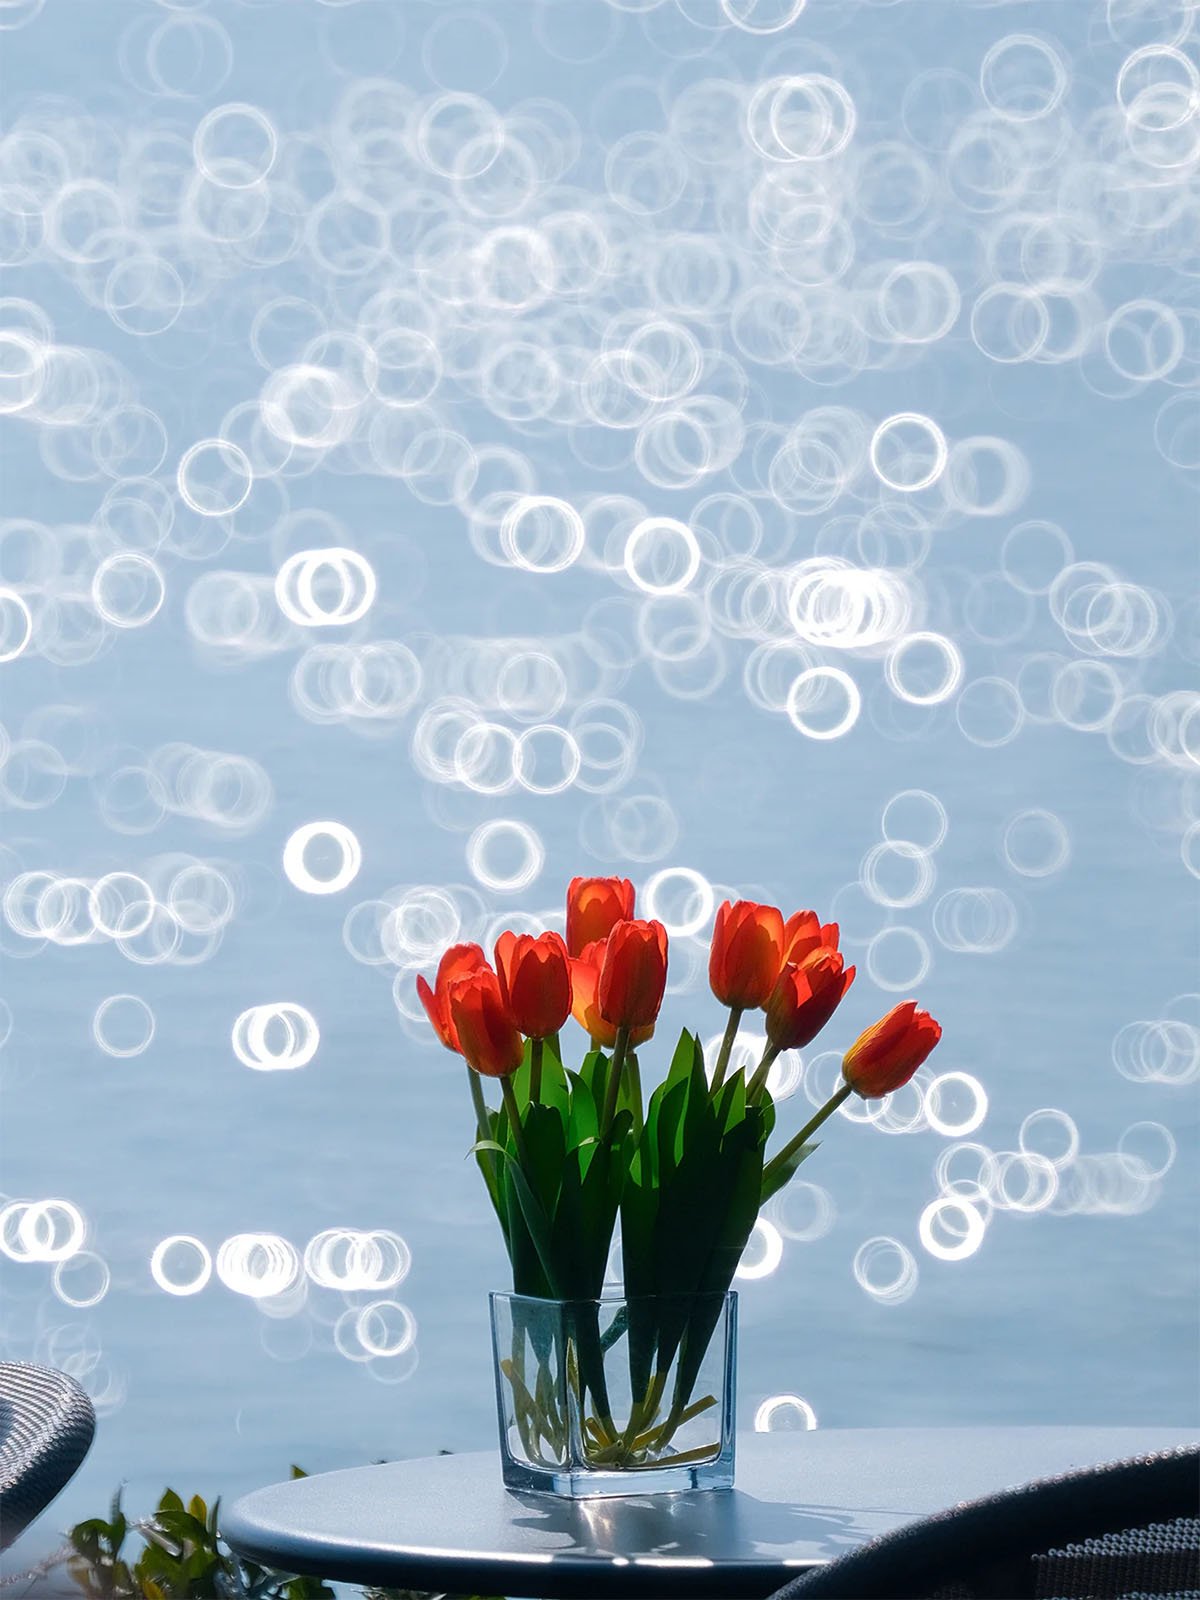 A clear glass vase with vibrant red tulips is placed on a round table. The background features a soft blur with large, circular bokeh lights that evoke the reflection of sunlight on water. The scene exudes a serene and tranquil atmosphere.